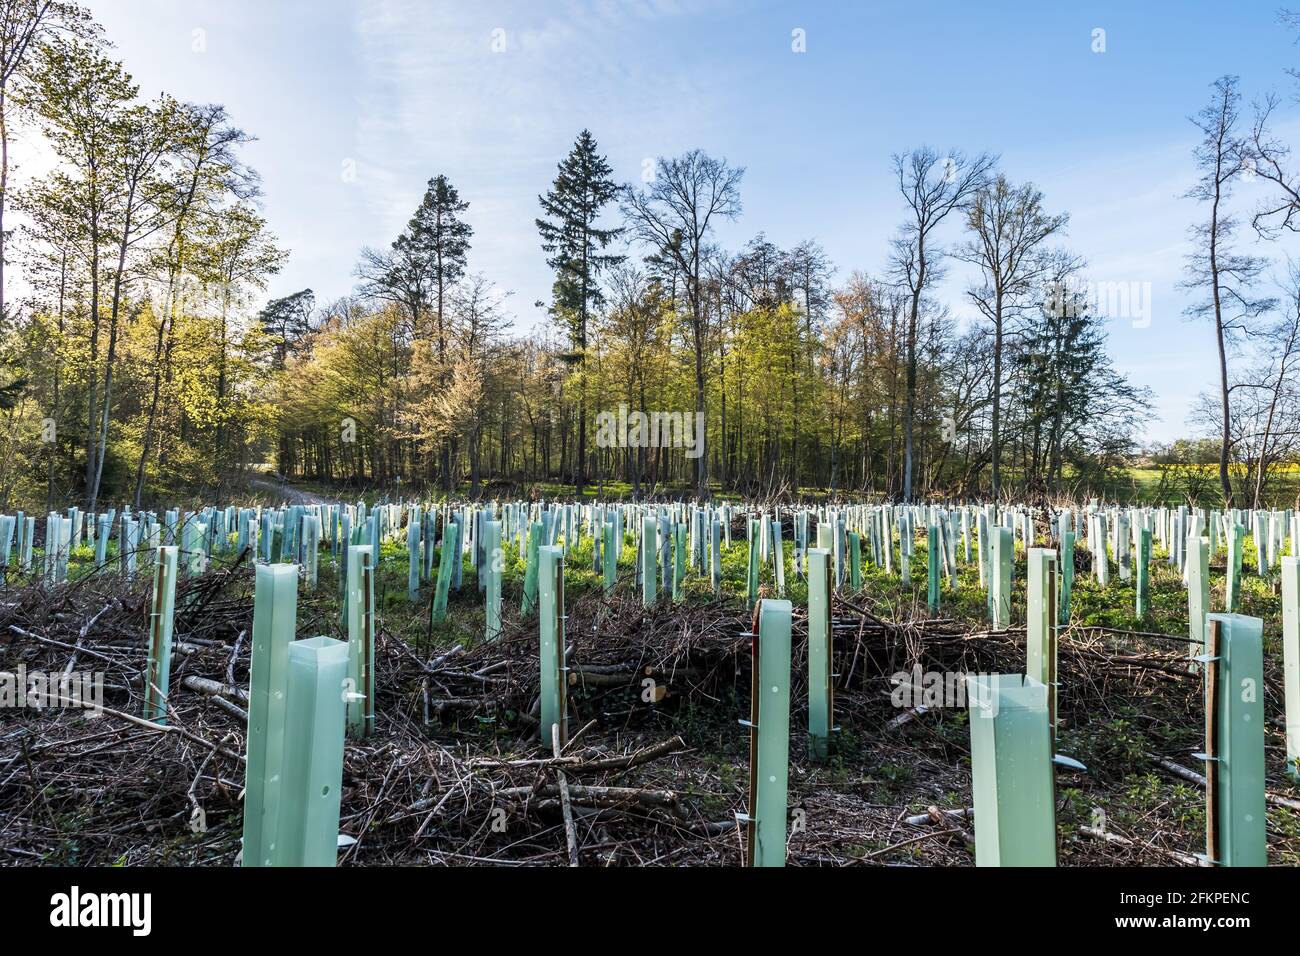 Reforestation in mixed forest with pipe support for the young trees Stock Photo